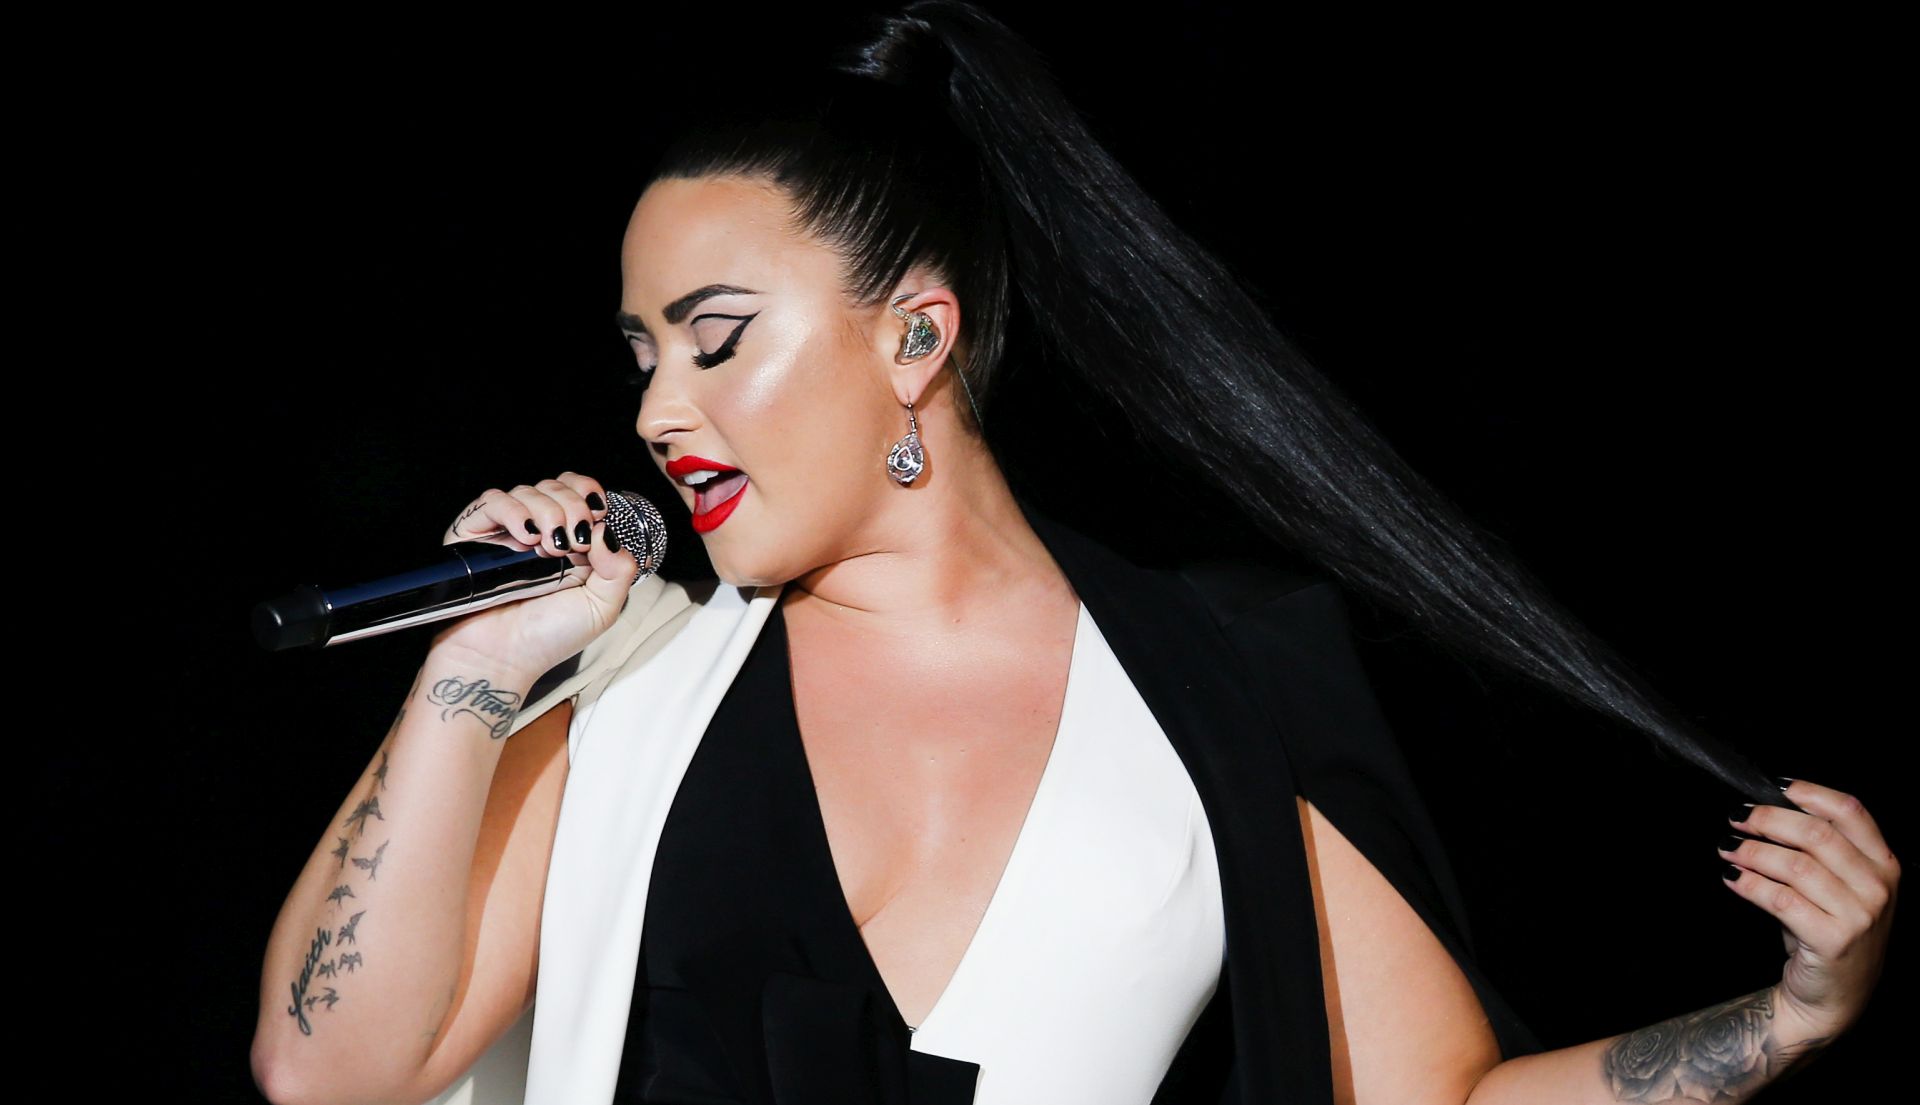 epa06908640 (FILE) US singer and composer Demi Lovato performs in concert at the World Stage during the 8th edition of Rock in Rio Lisbon, at Parque da Bela Vista in Lisbon, Portugal, 24 June 2018 (reissued 24 July 2018). According to media reports on 24 July 2018, US singer Demi Lovato has been hospitalized in Los Angeles following a suspected overdose.  EPA/JOSE SENA GOULAO